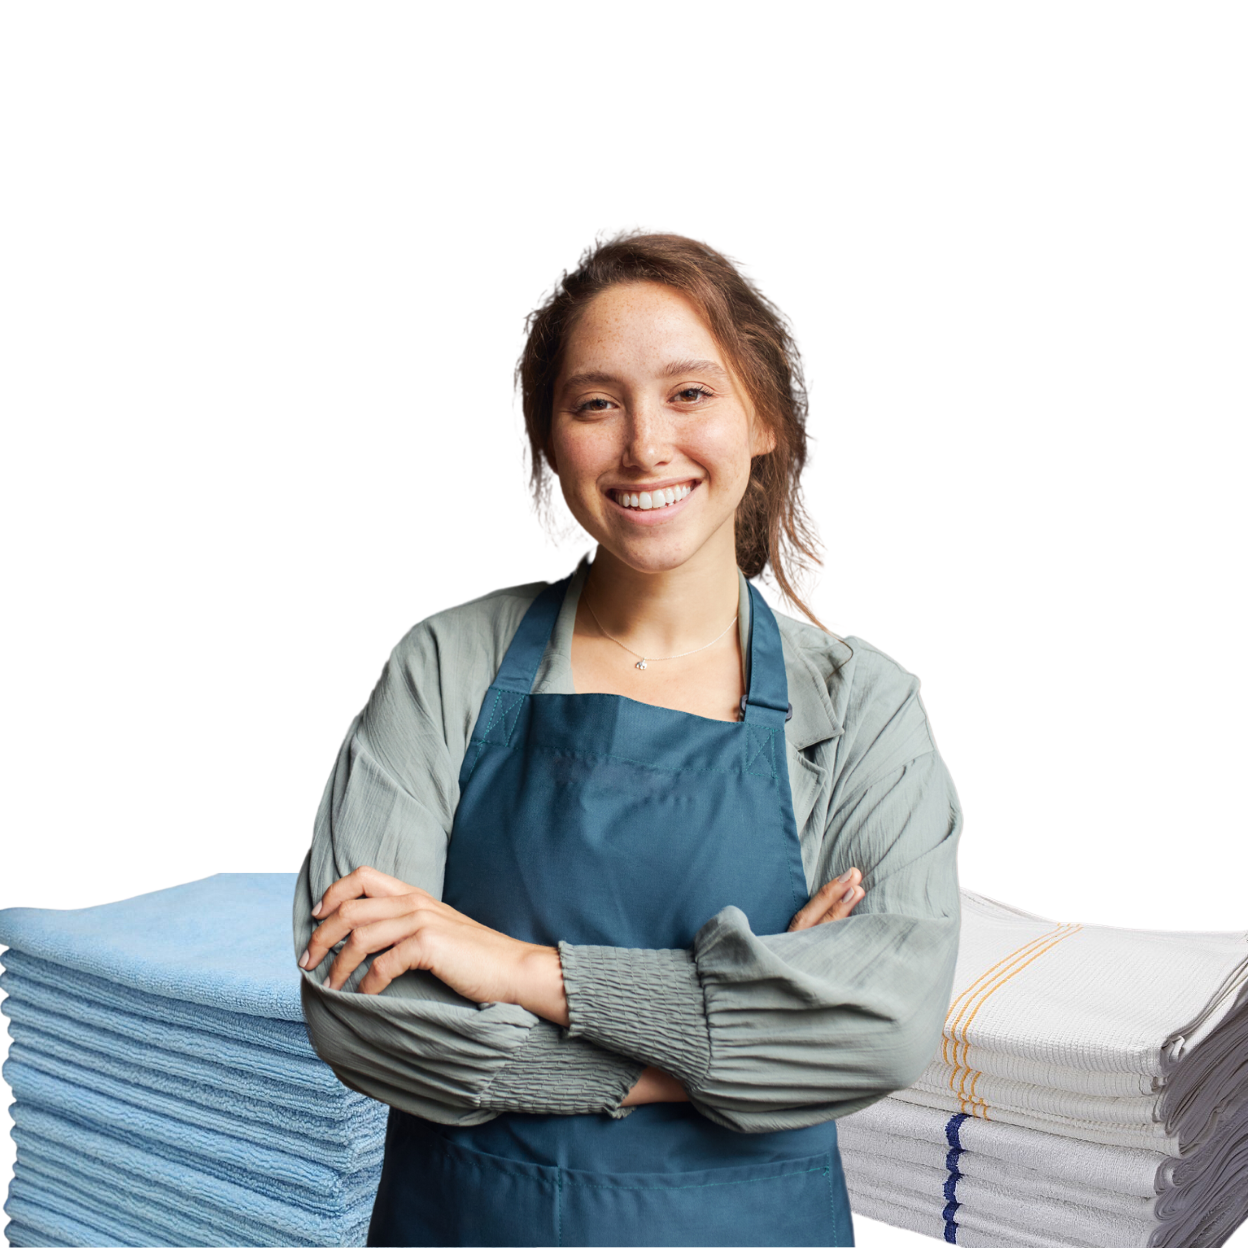 Woman-wearing-an-appron-with-kitchen-towel-and-microfiber-towel-in-background-2